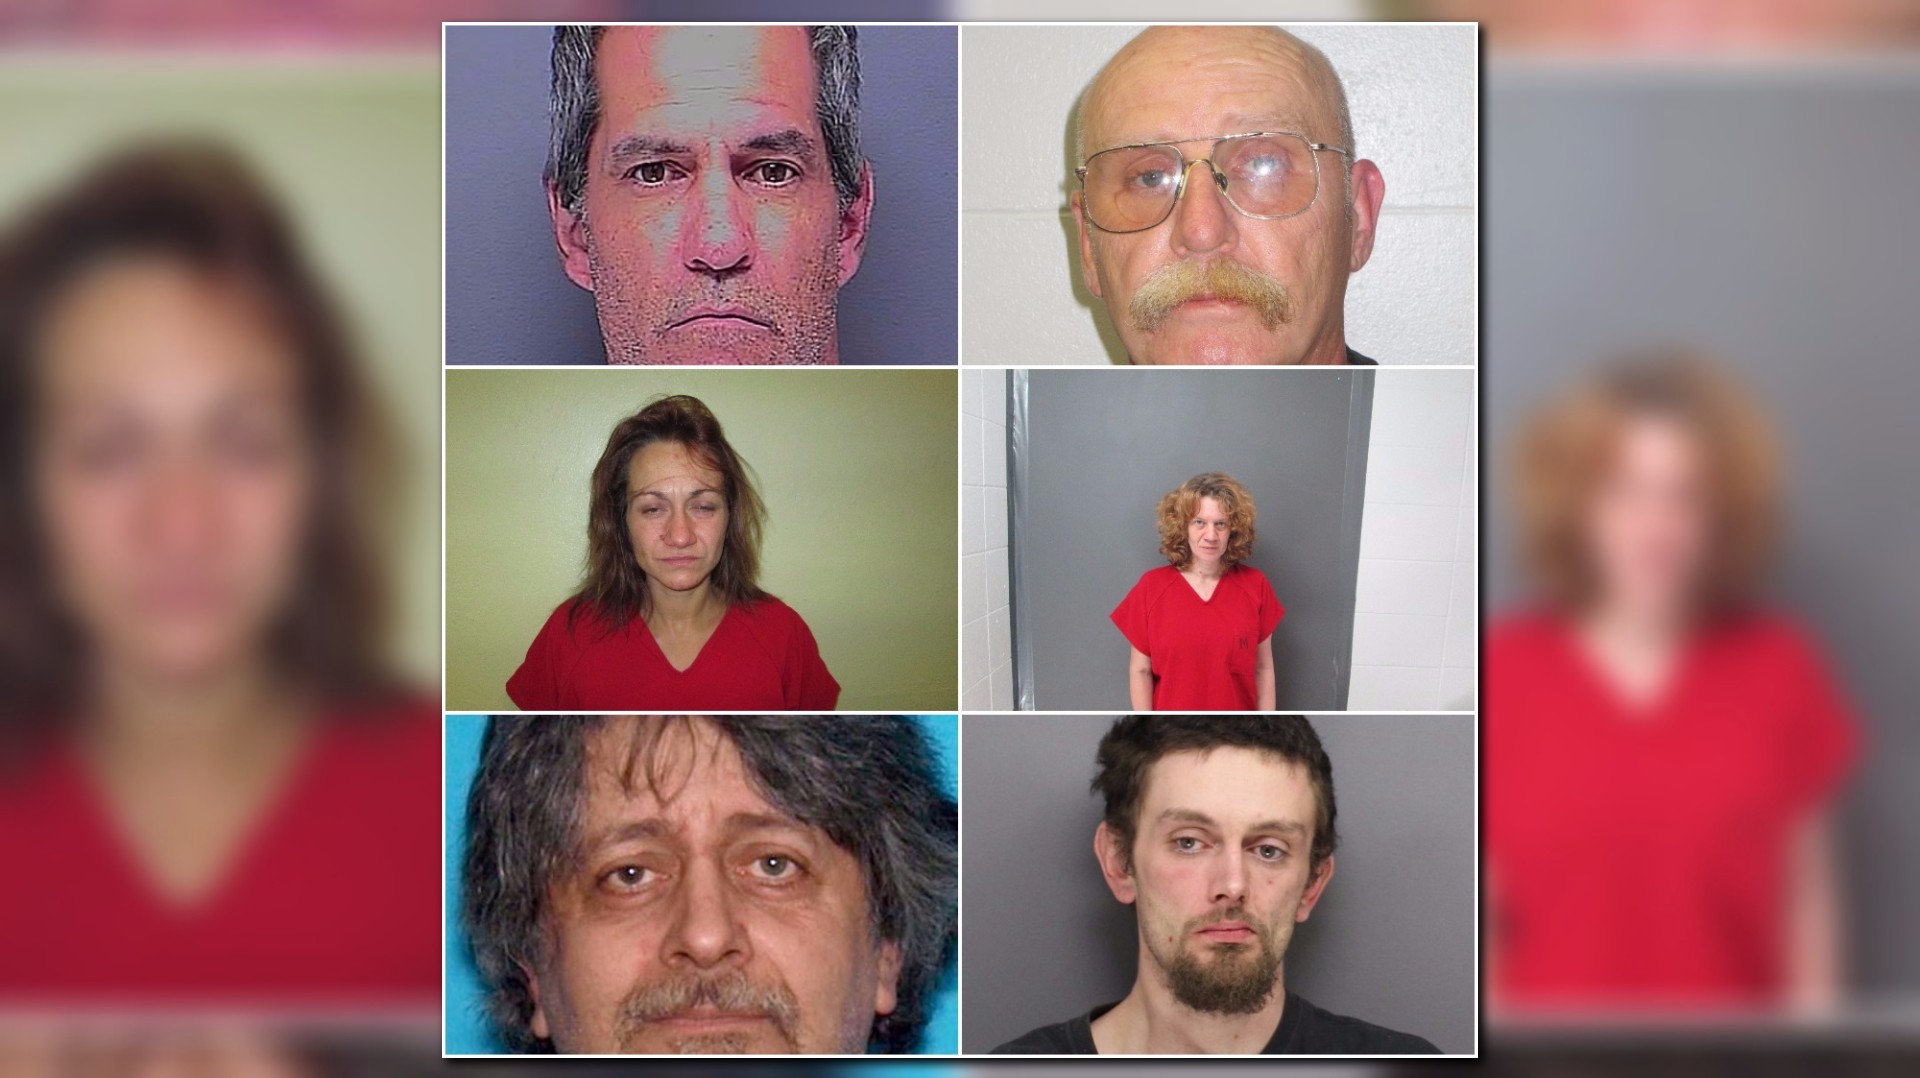 Search warrant leads to 6 arrests in Orofino